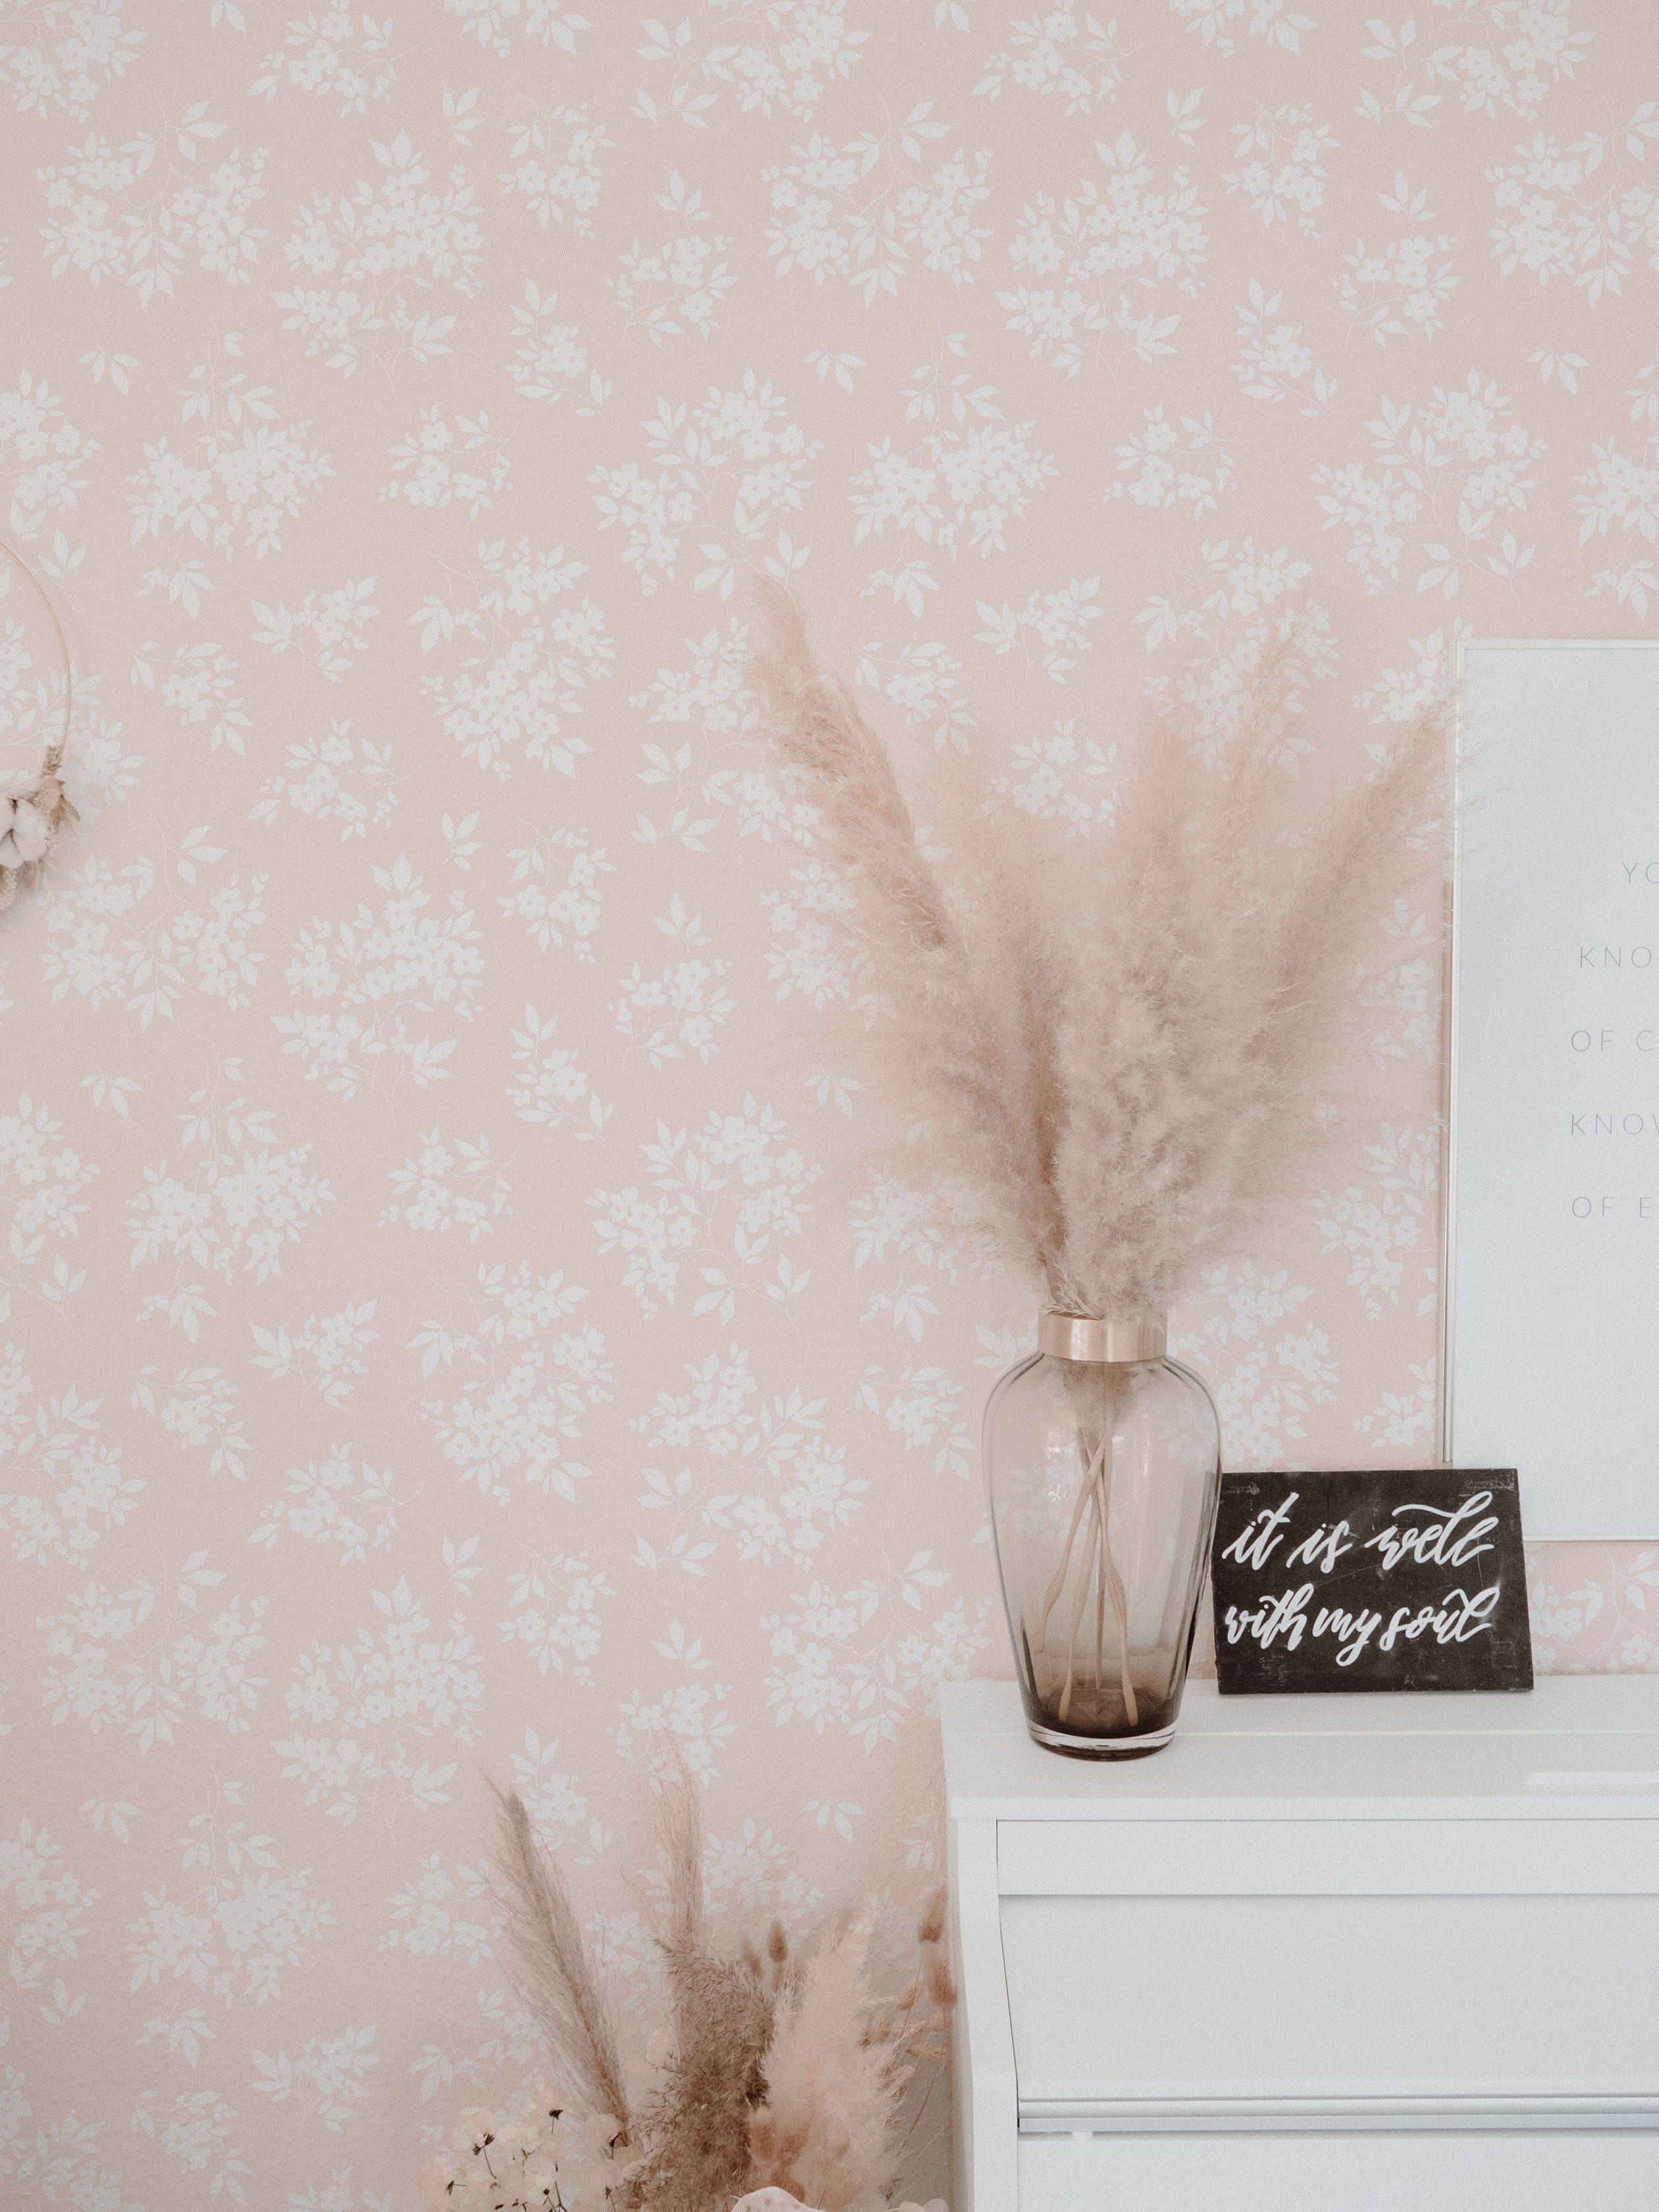 A stylish room corner featuring the Vintage Garden Floral Wallpaper in champagne. The wall is complemented by a rustic vase filled with pampas grass and a motivational quote sign, creating a cozy and inspirational space.